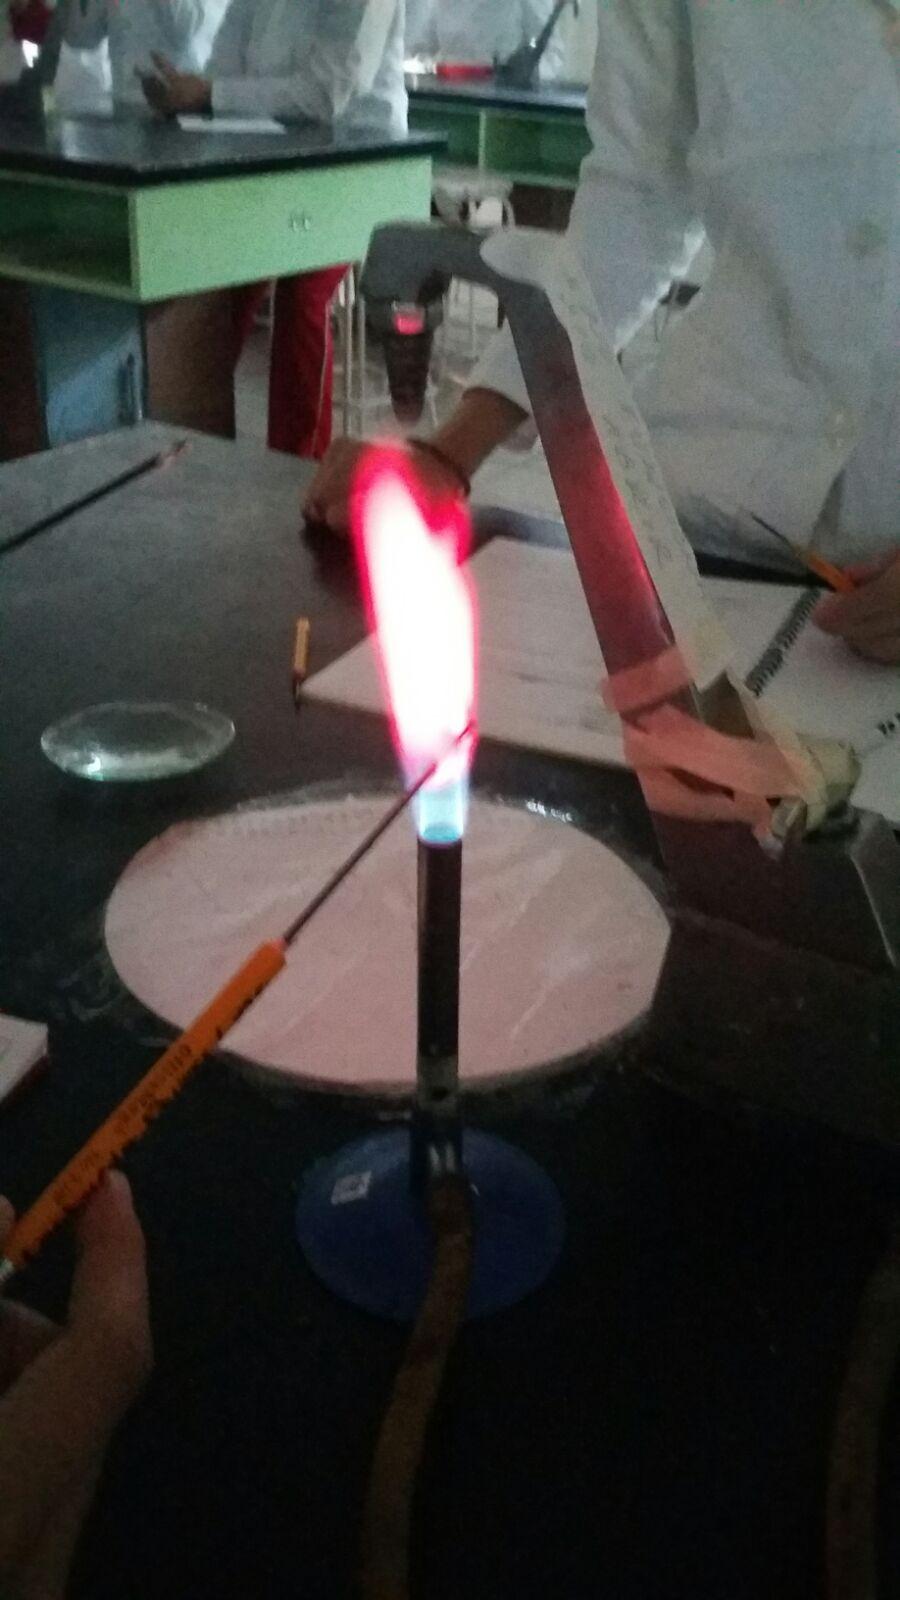 C:\Users\victor\Documents\3°f 2015\quimica\practicas quimica (7)\IMG-20151216-WA0013.jpg